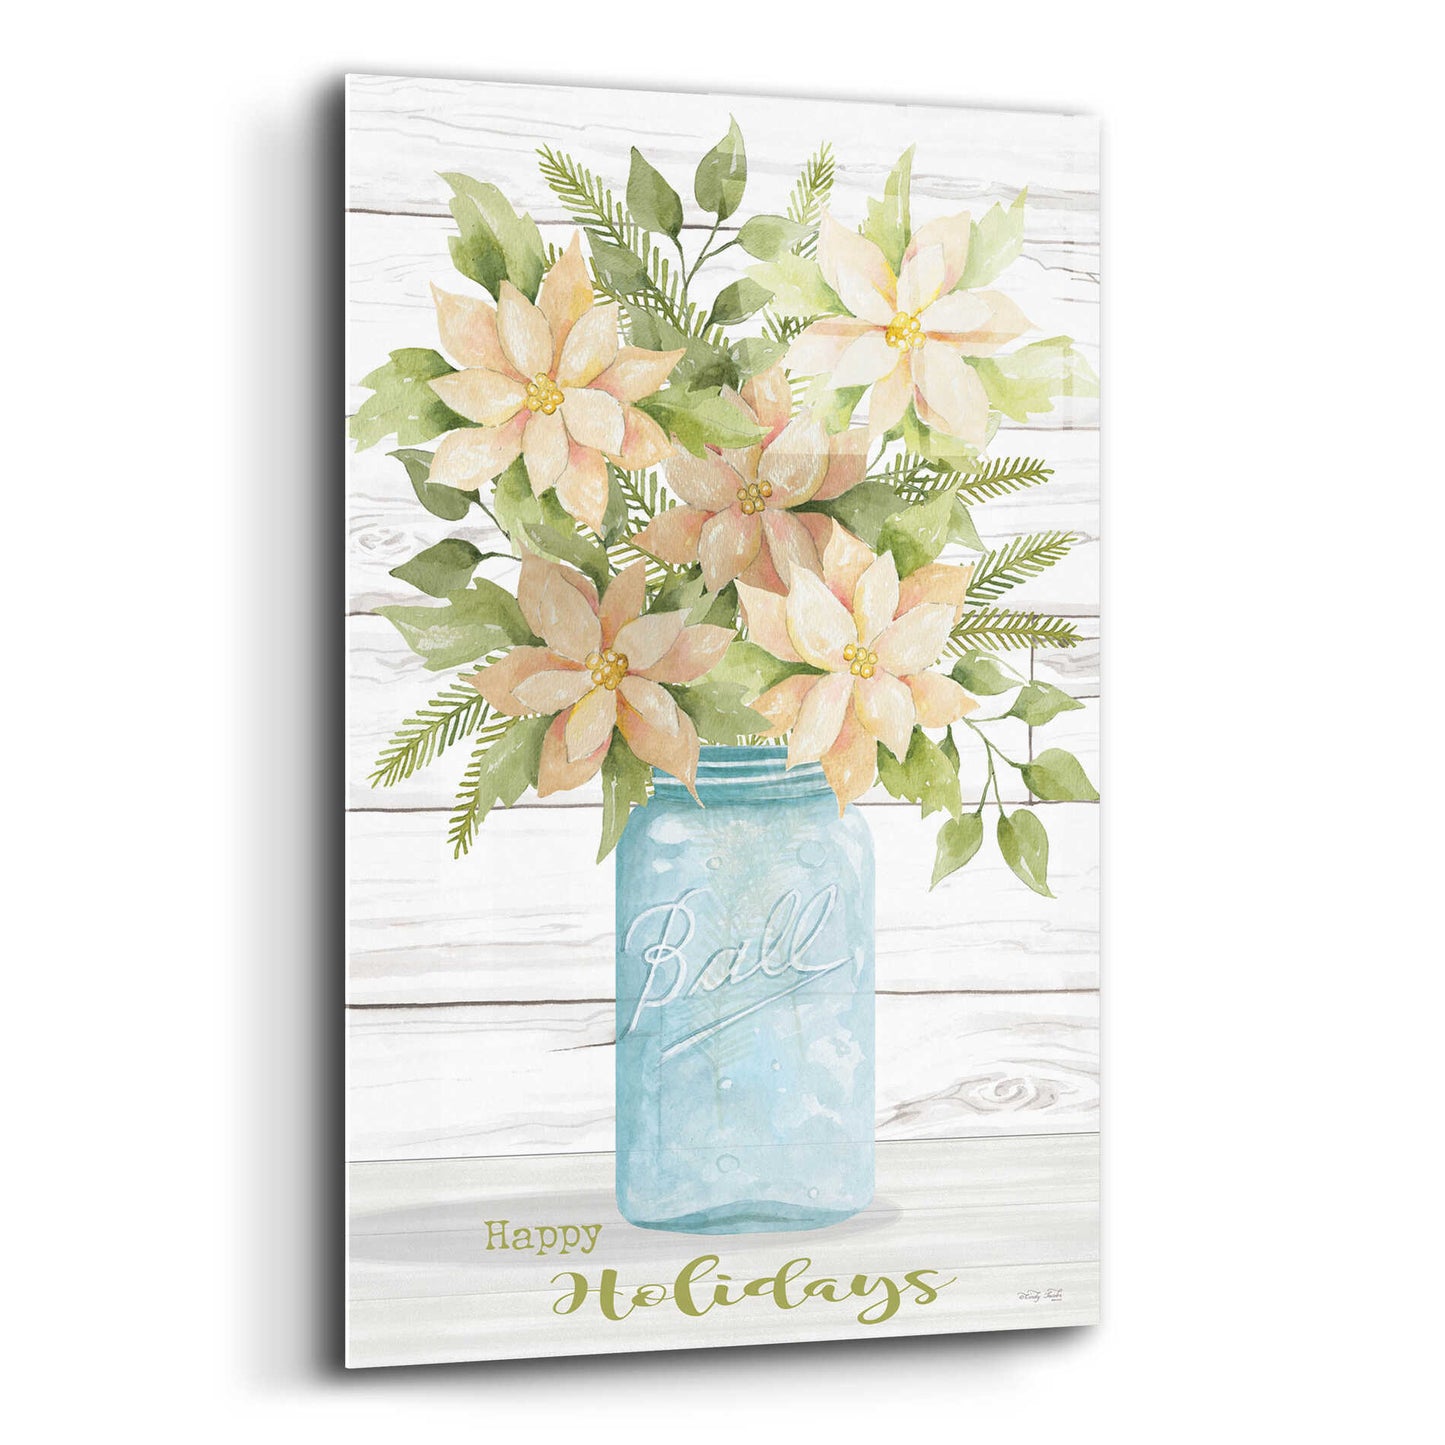 Epic Art 'Happy Holidays White Poinsettias' by Cindy Jacobs, Acrylic Glass Wall Art,12x16